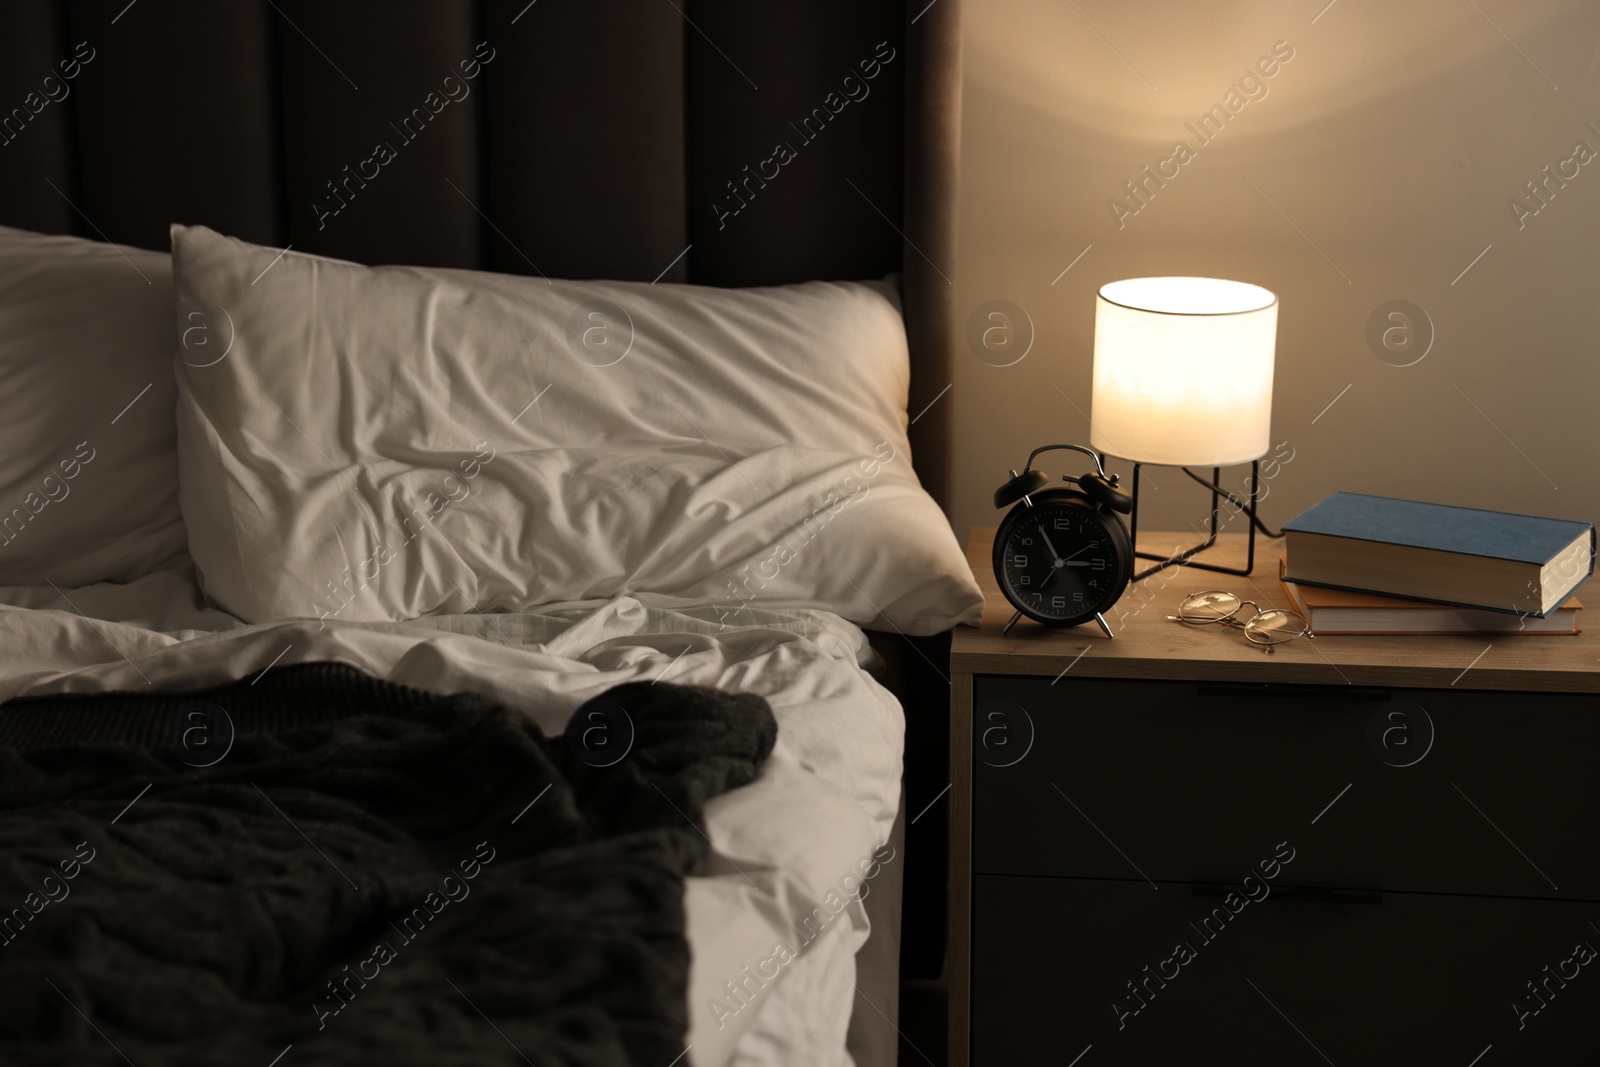 Photo of Nightlight, alarm clock, glasses and books on bedside table near bed indoors